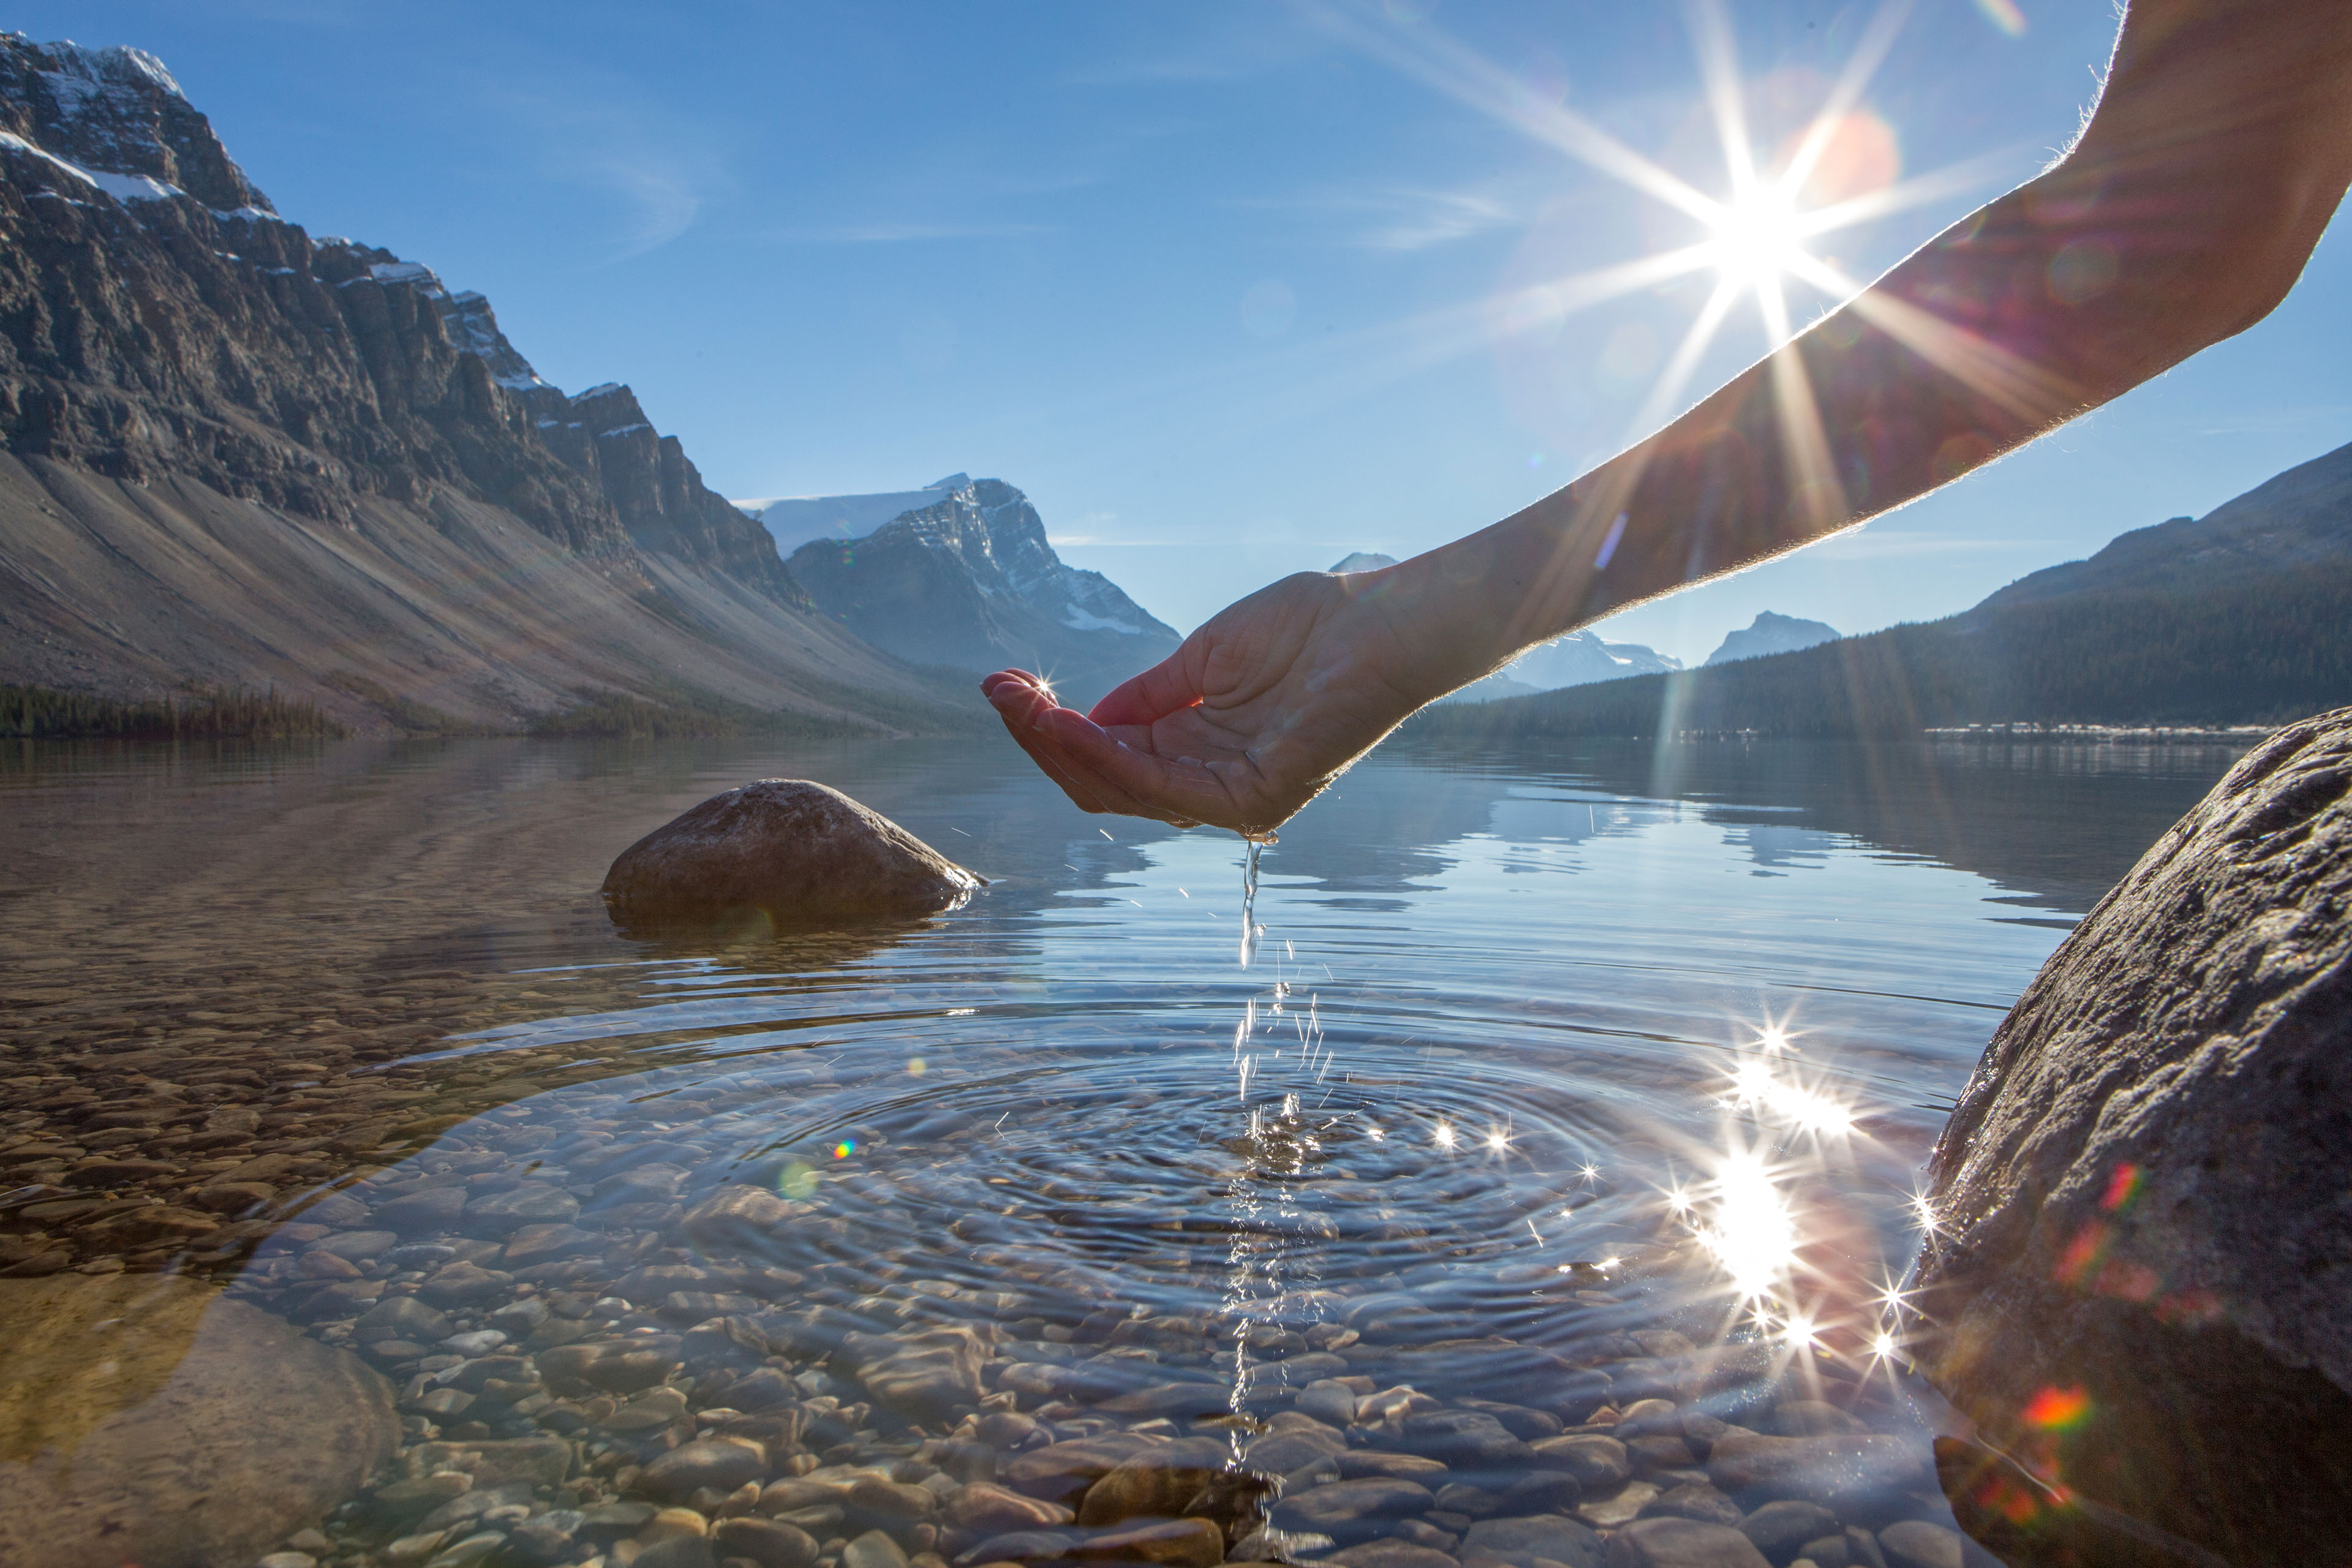 Human hand cupped to catch the fresh water from lake